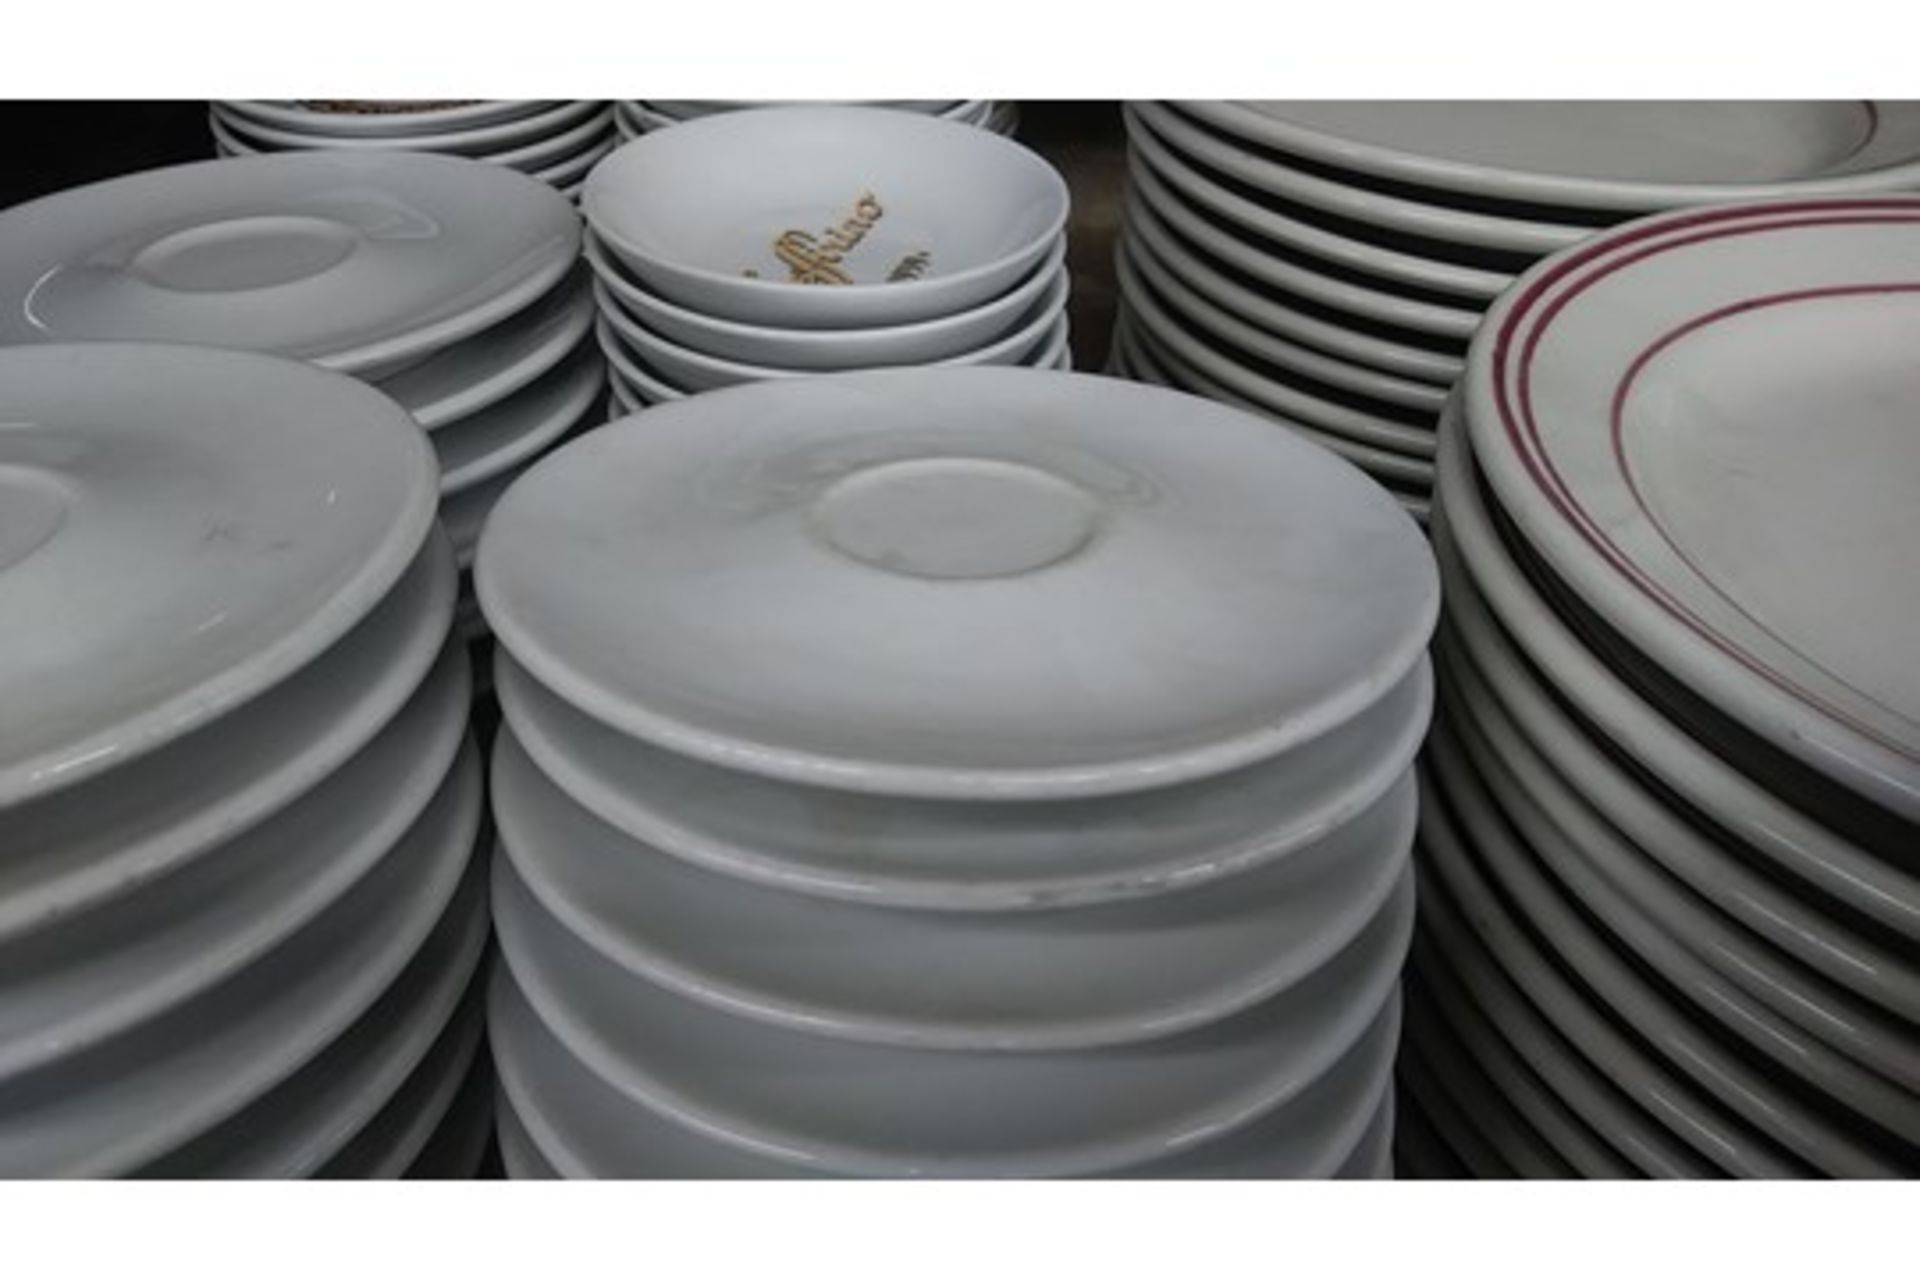 5" STEELITE SAUCER (includes approx QTY 43 in this lot)